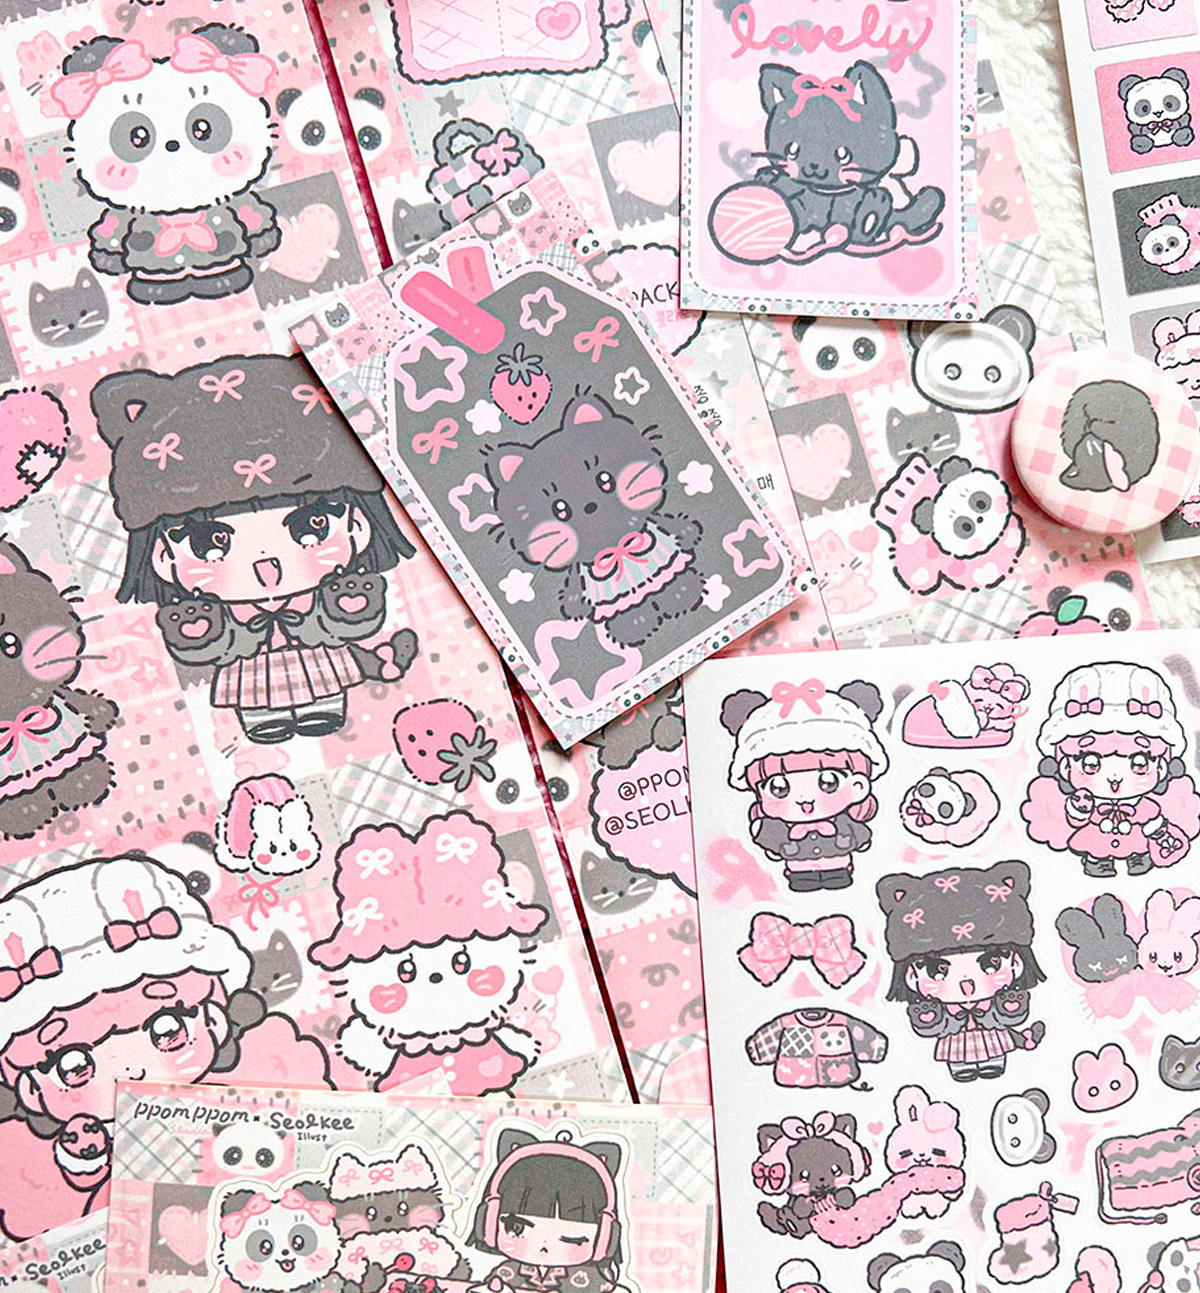 Seolkee x Poomppom Collaboration Pack [12 Stickers]